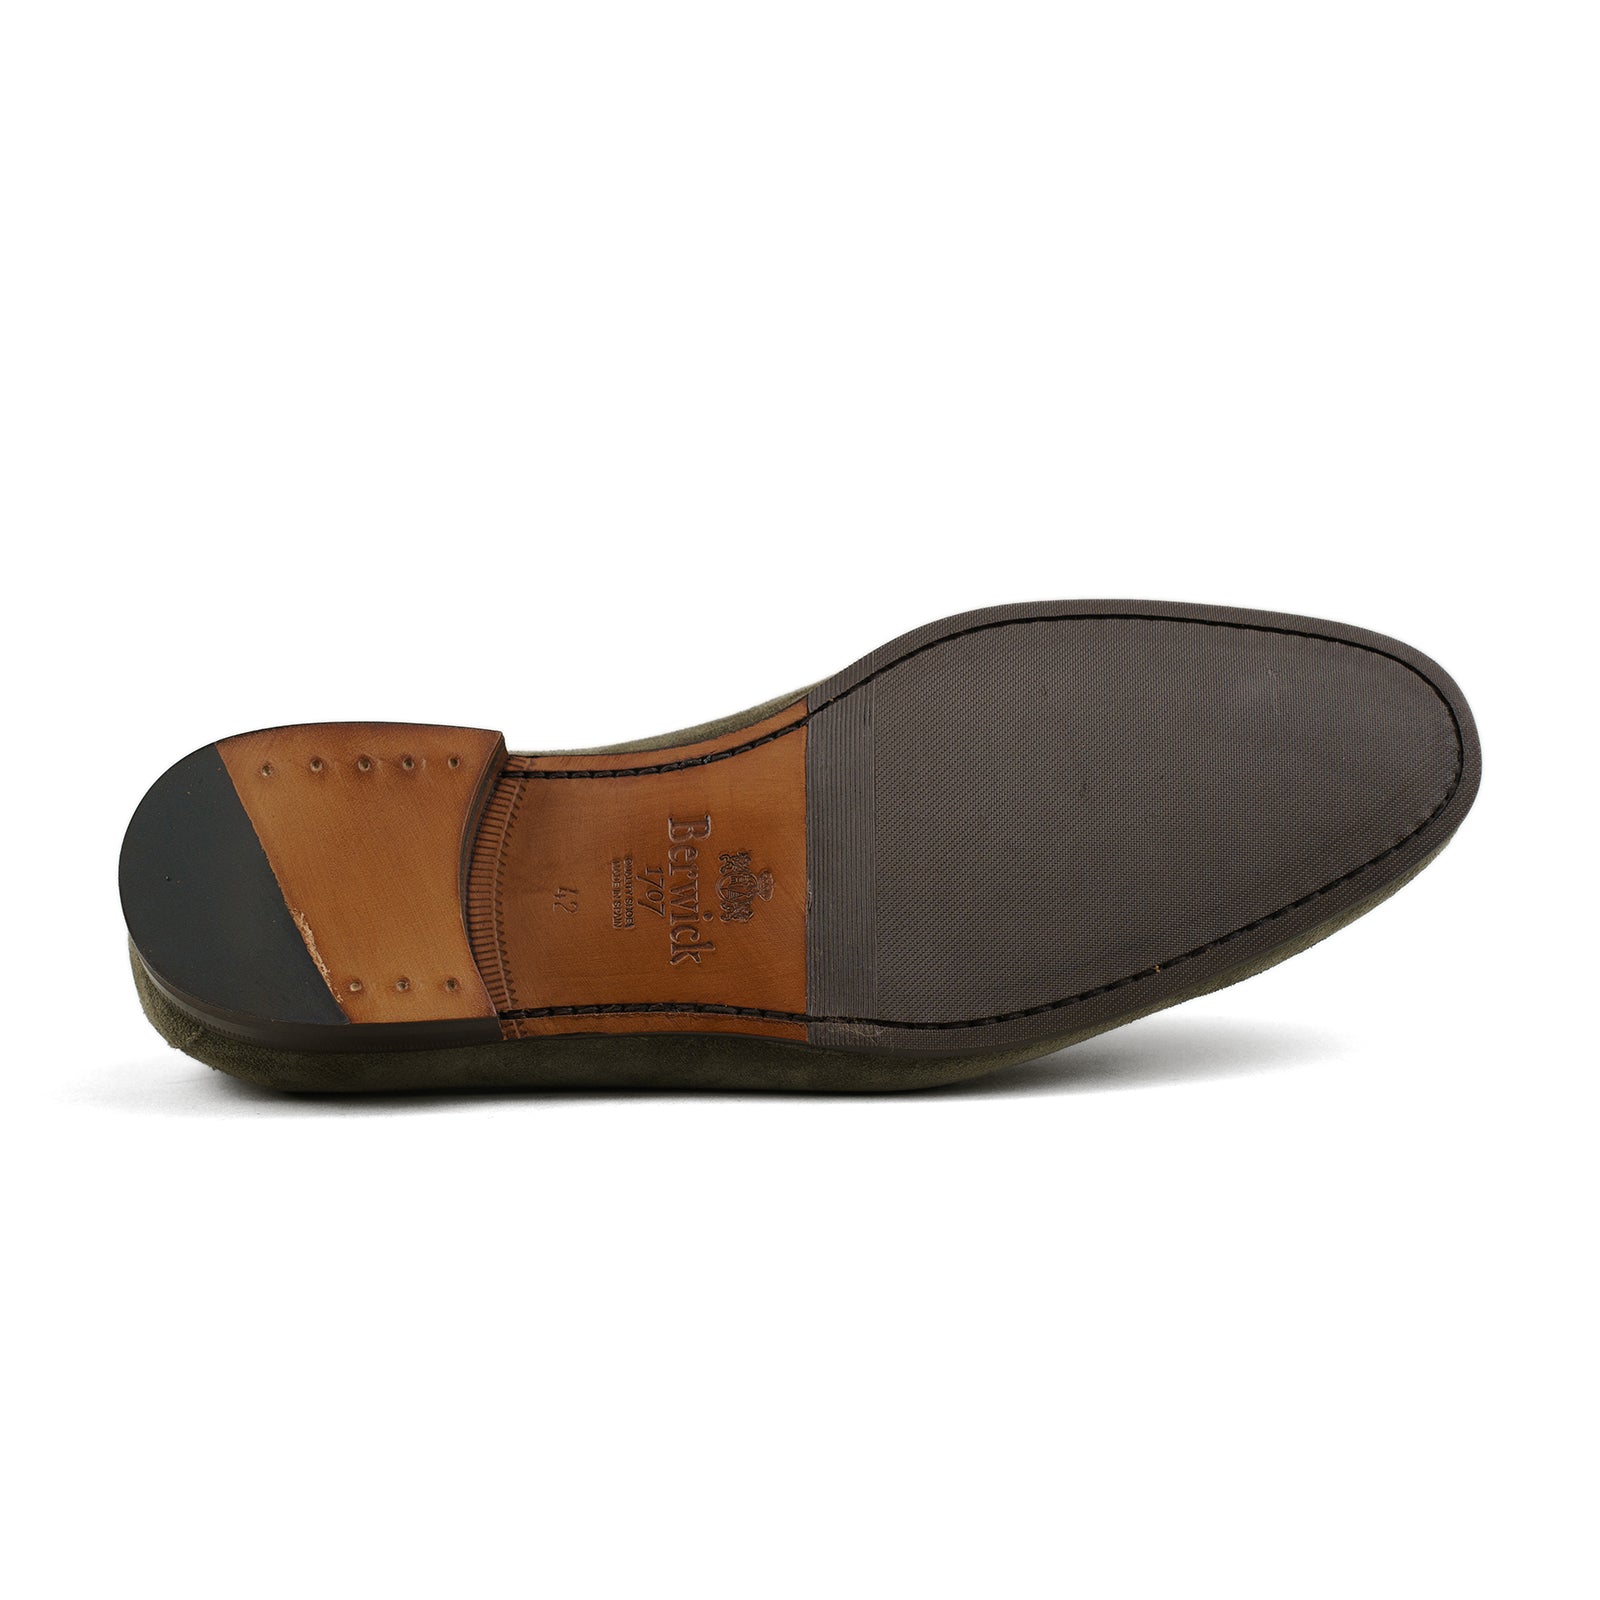 Belgian Penny Loafer - Tobacco Suede w/ Faux Croc Strap